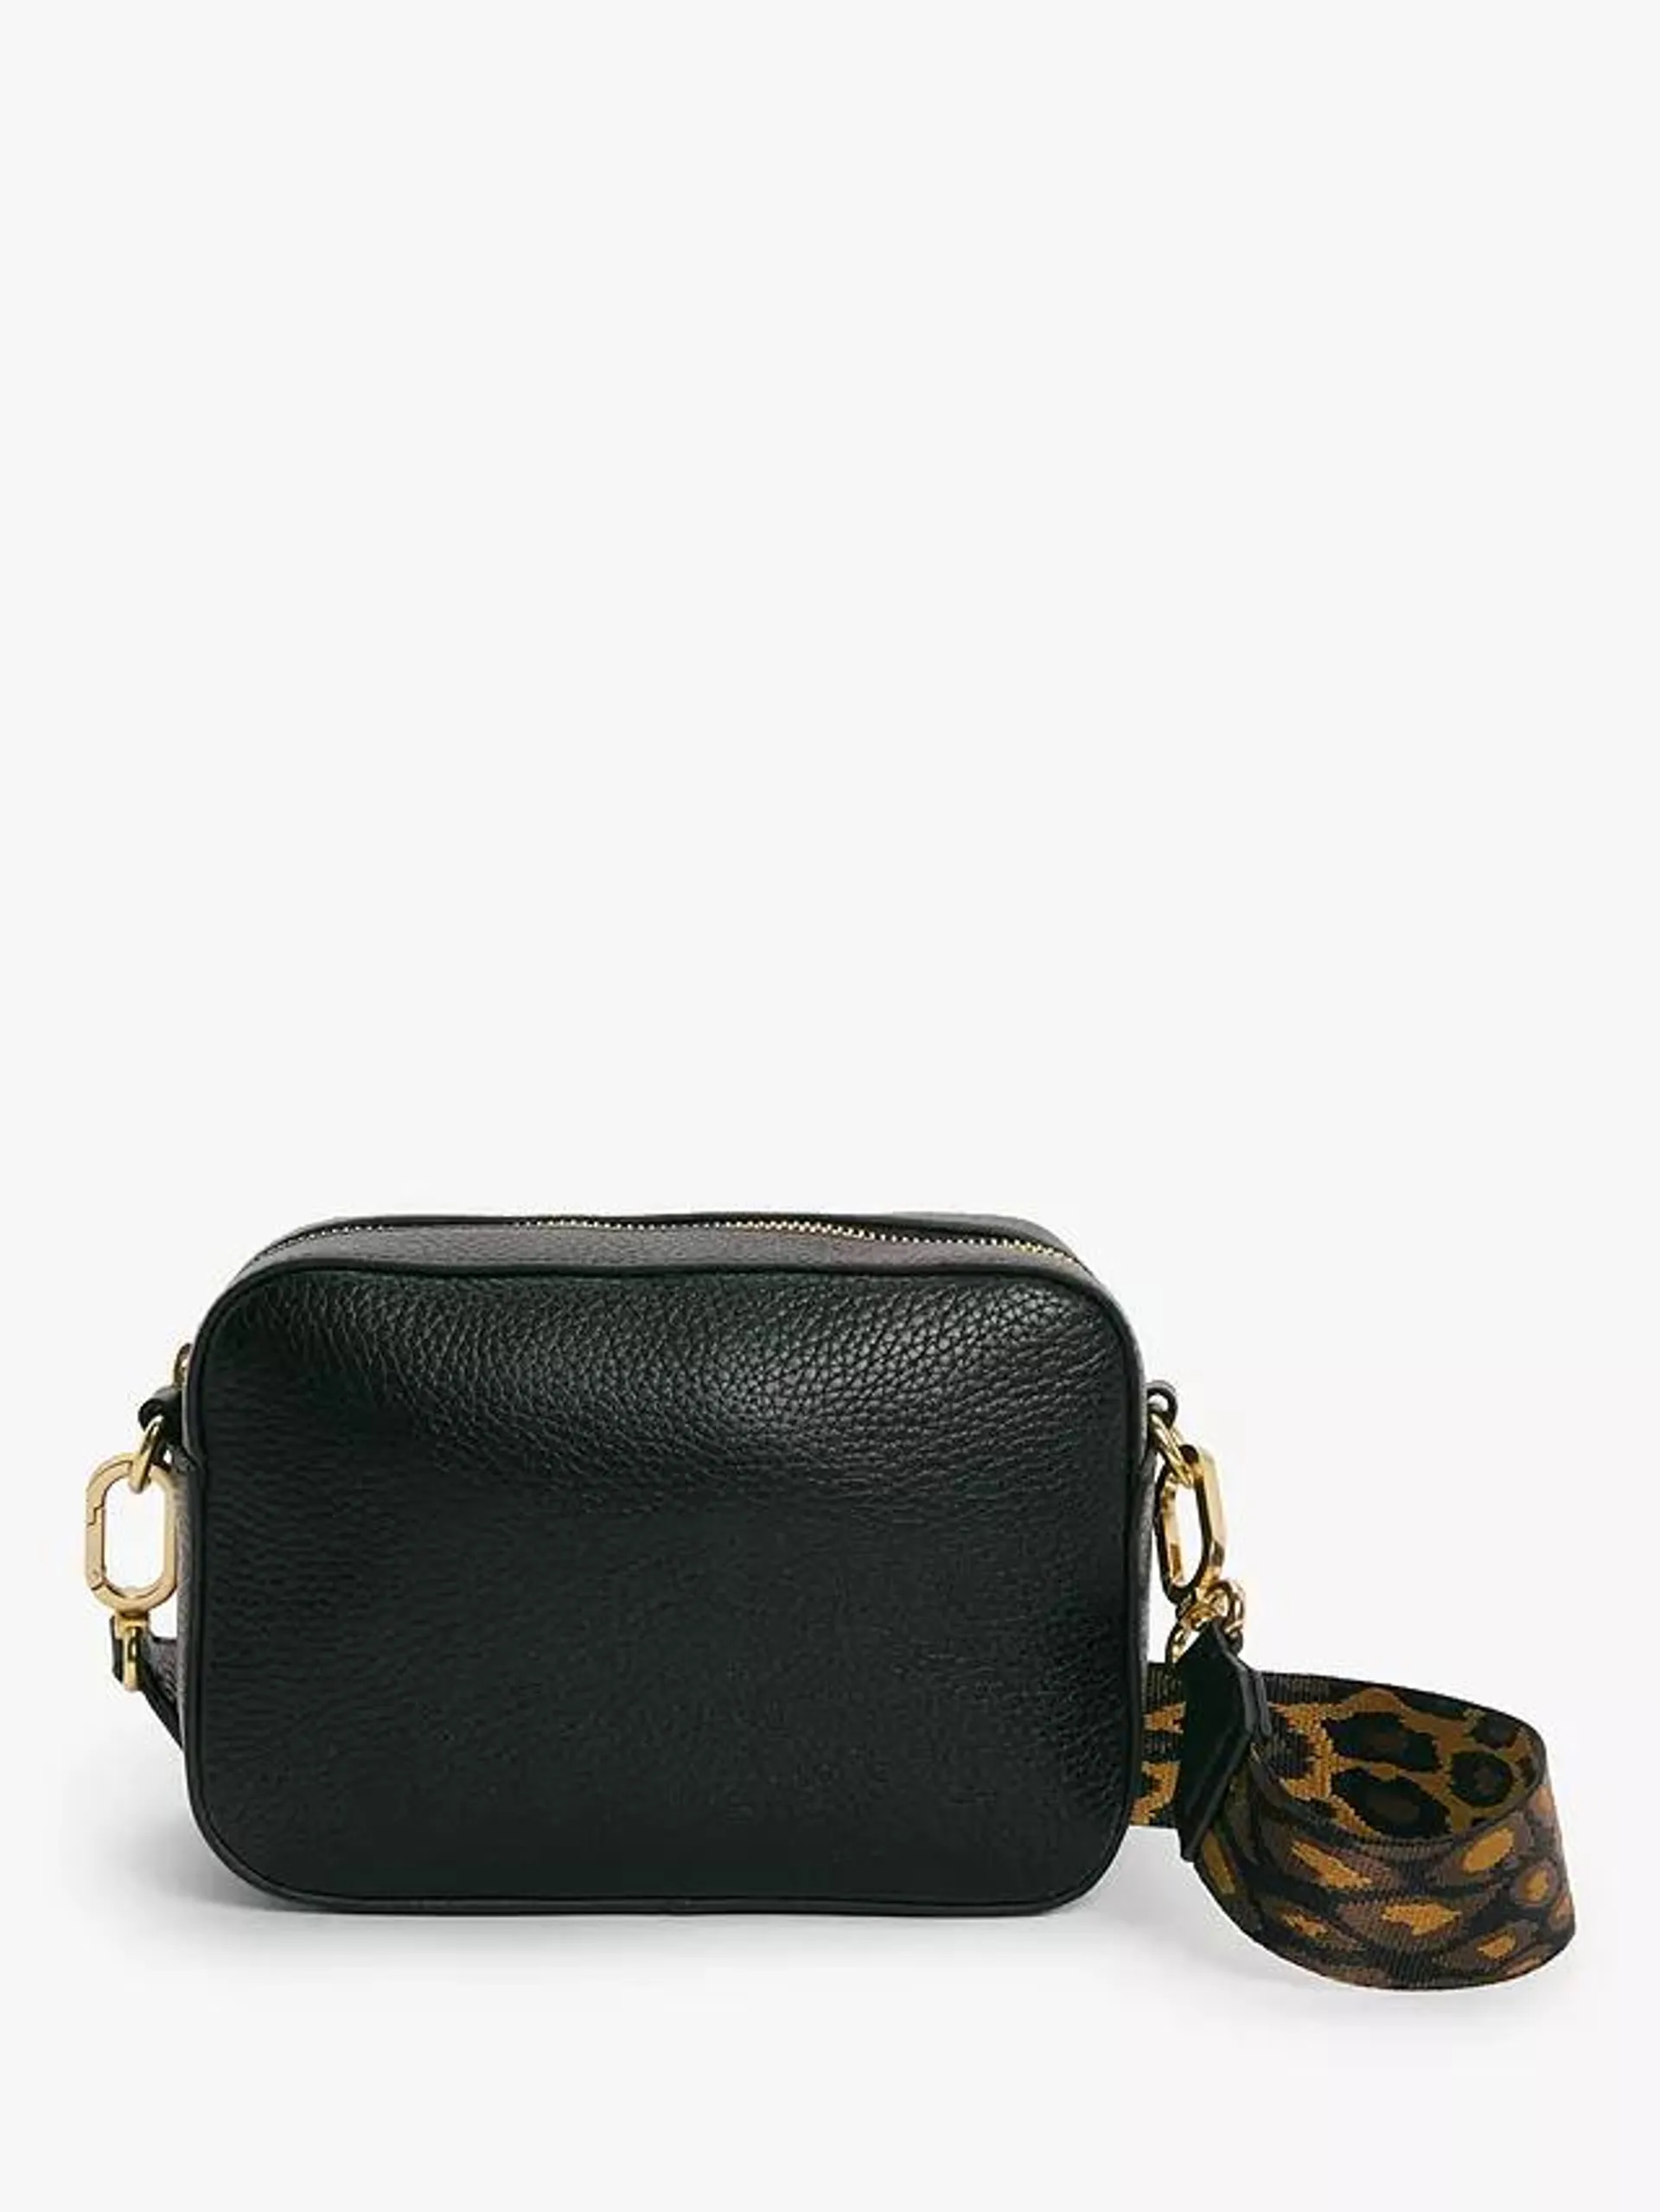 AND/OR Leather Camera Cross Body Bag, Black